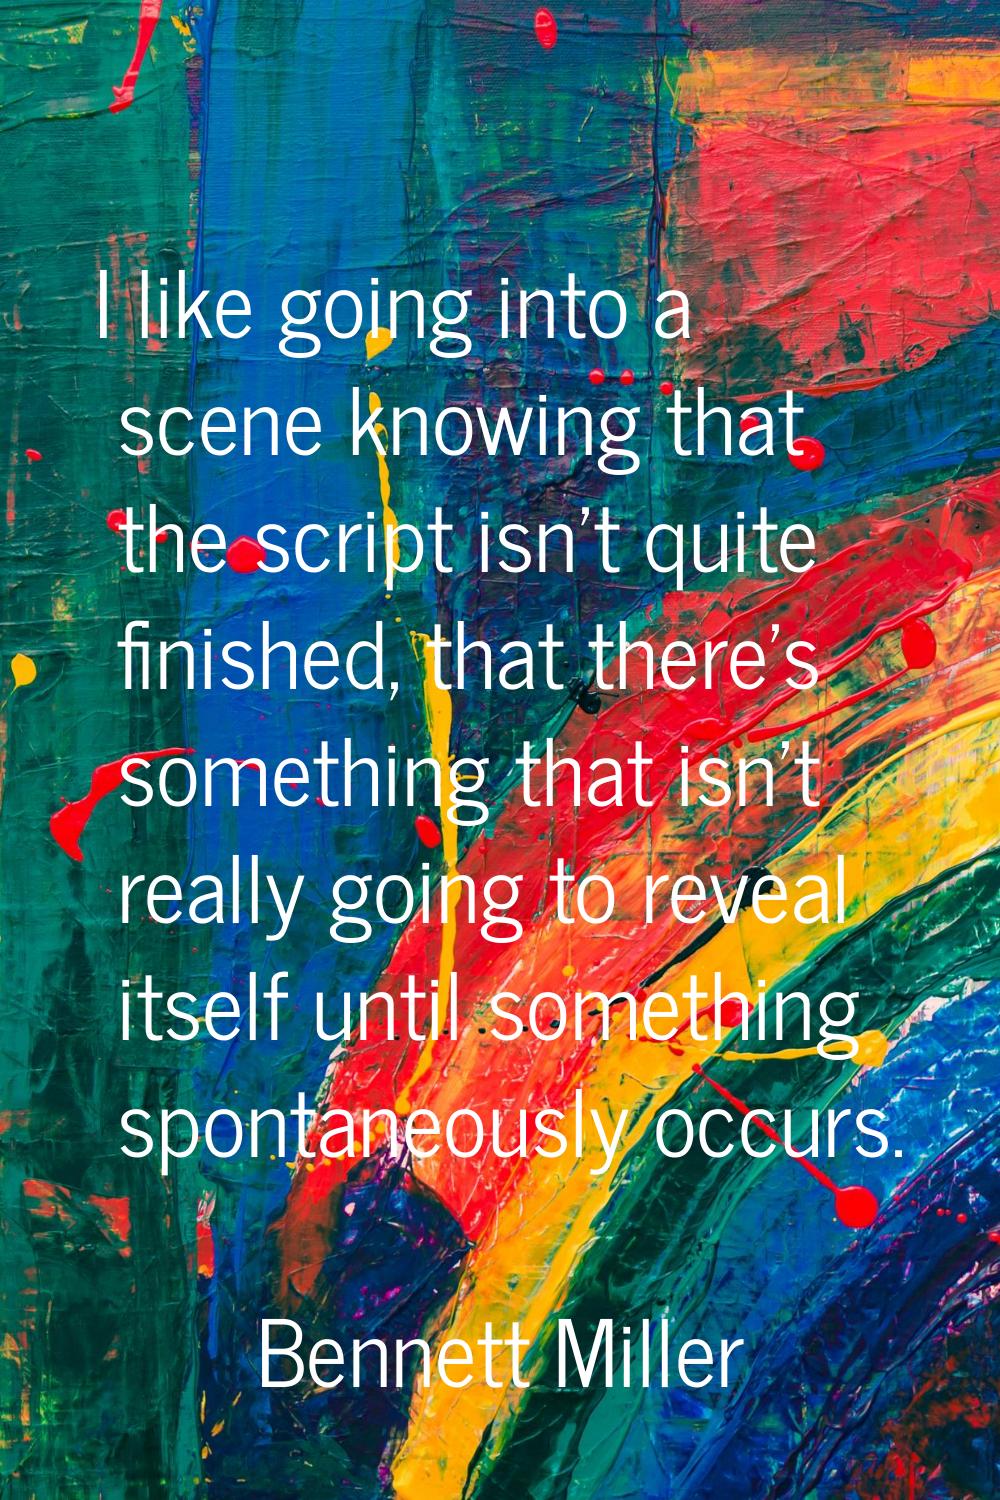 I like going into a scene knowing that the script isn't quite finished, that there's something that